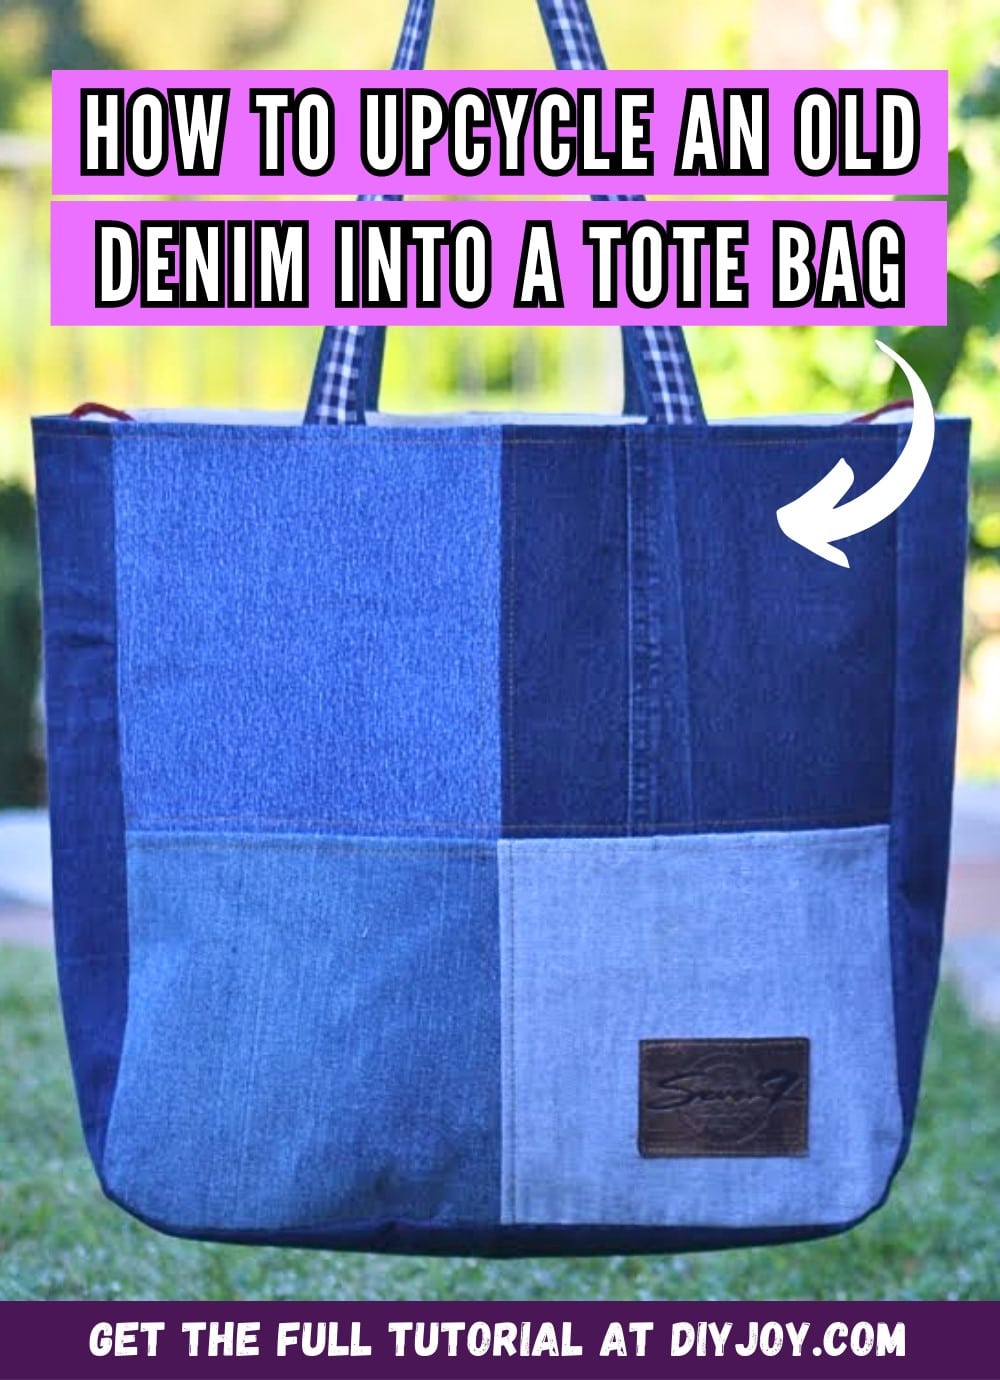 How to Upcycle an Old Denim Into a Tote Bag